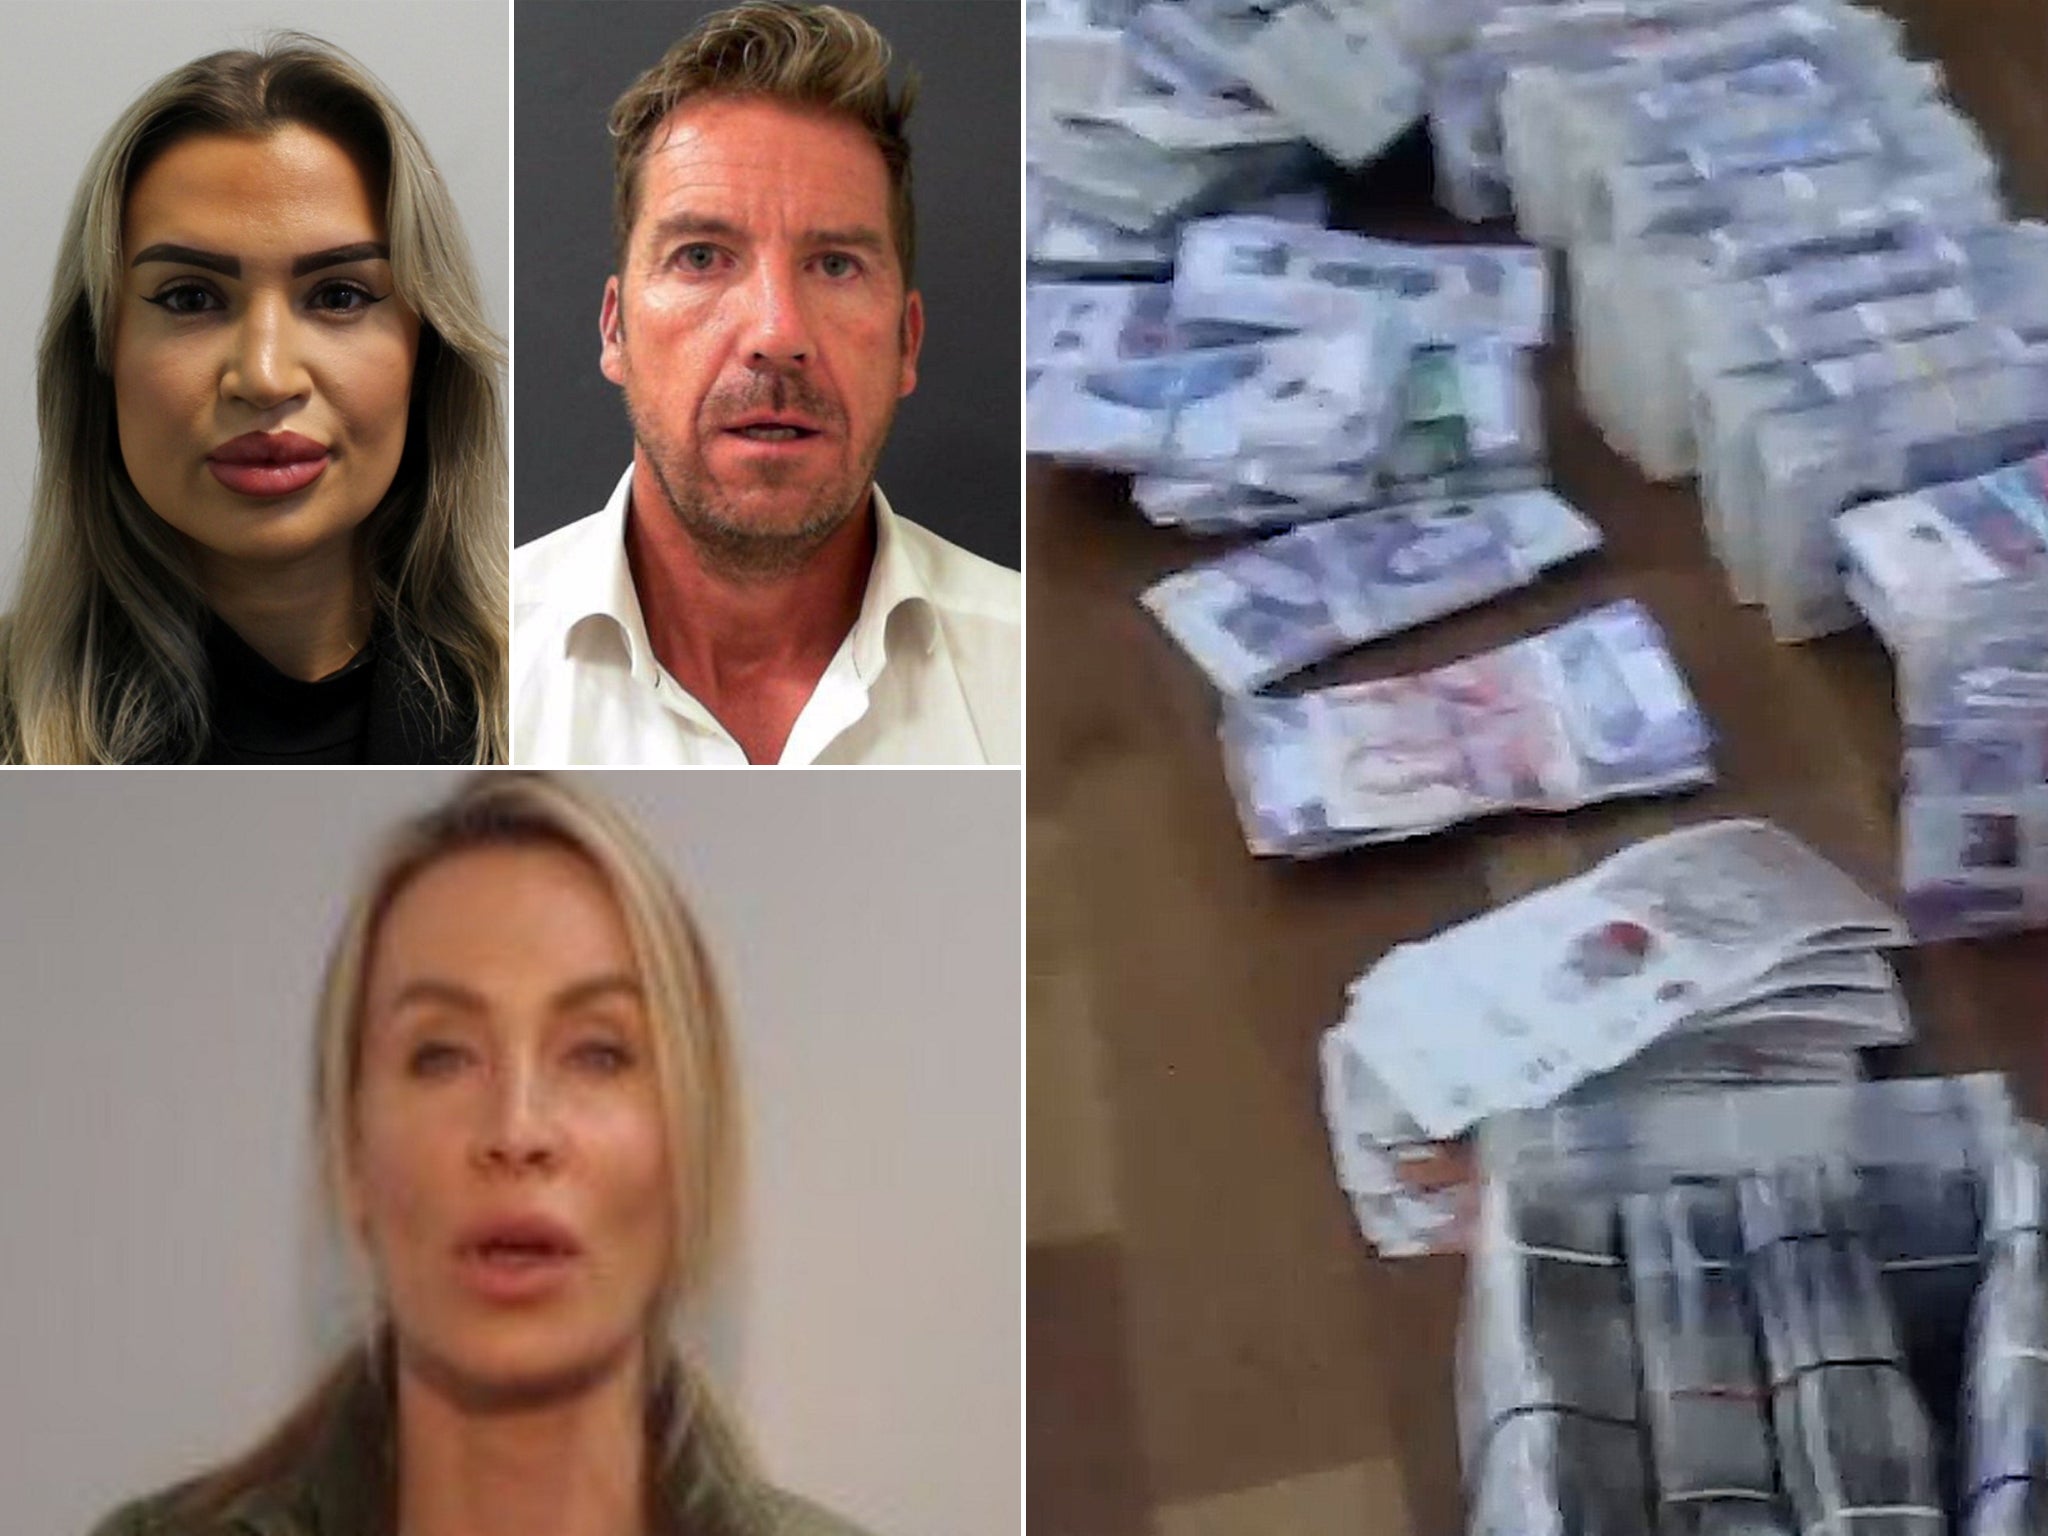 Beatrice Auty, 26, and Larvin’s current partner, Jonathan Johnson, 55, as well as Amy Harrison, 27, were all found guilty of money laundering